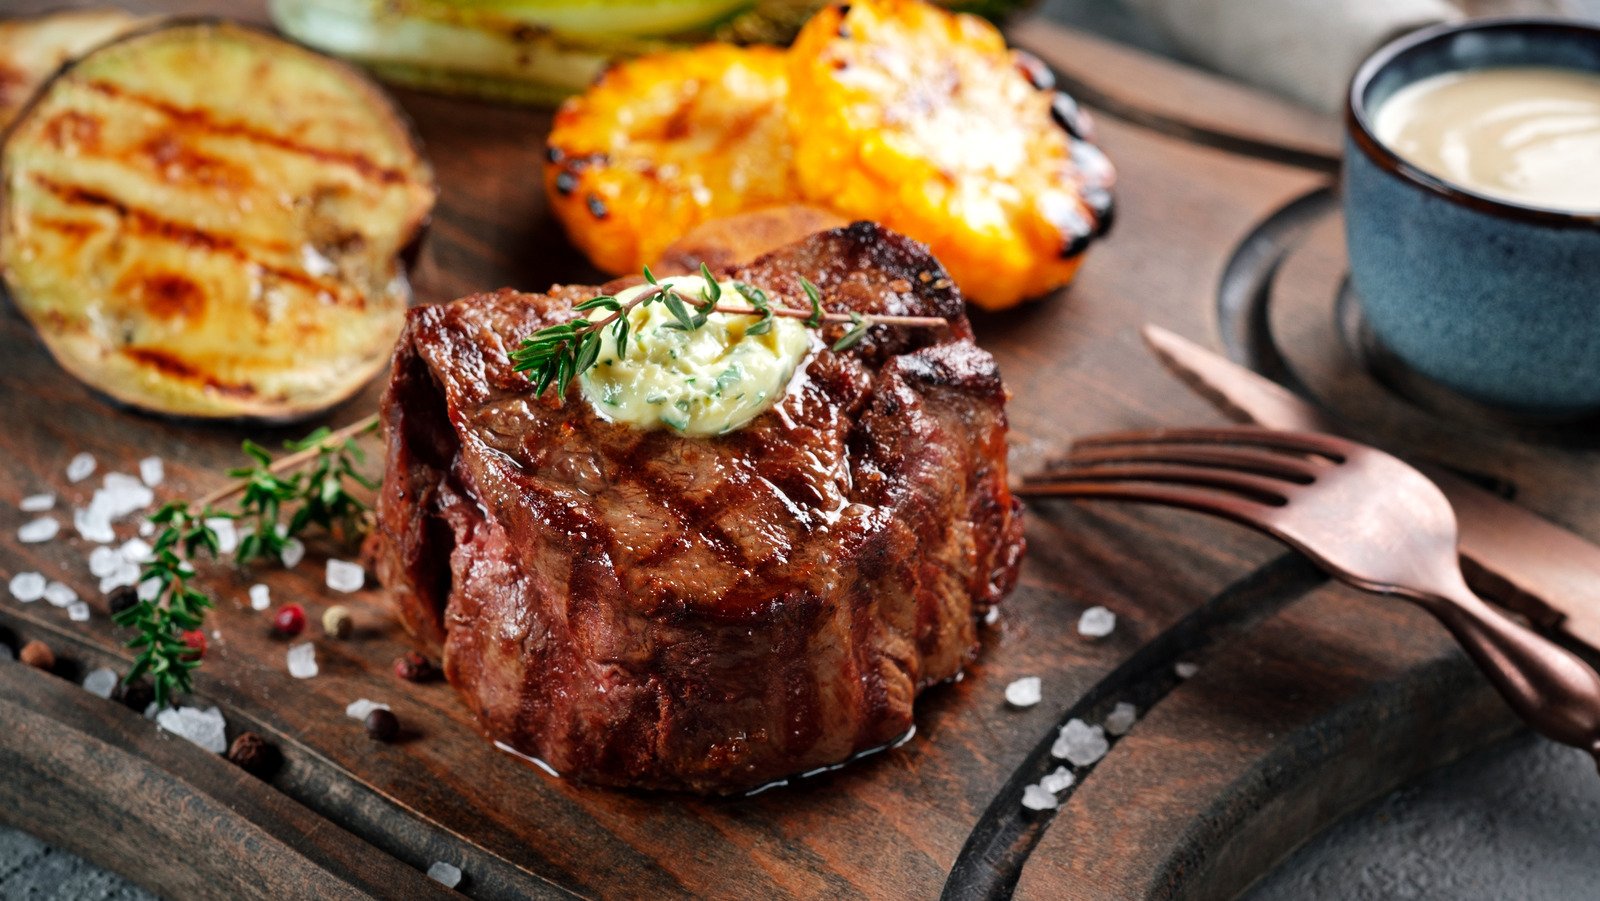 Over Half Of People Want Steak To Be Their 'Last Meal'